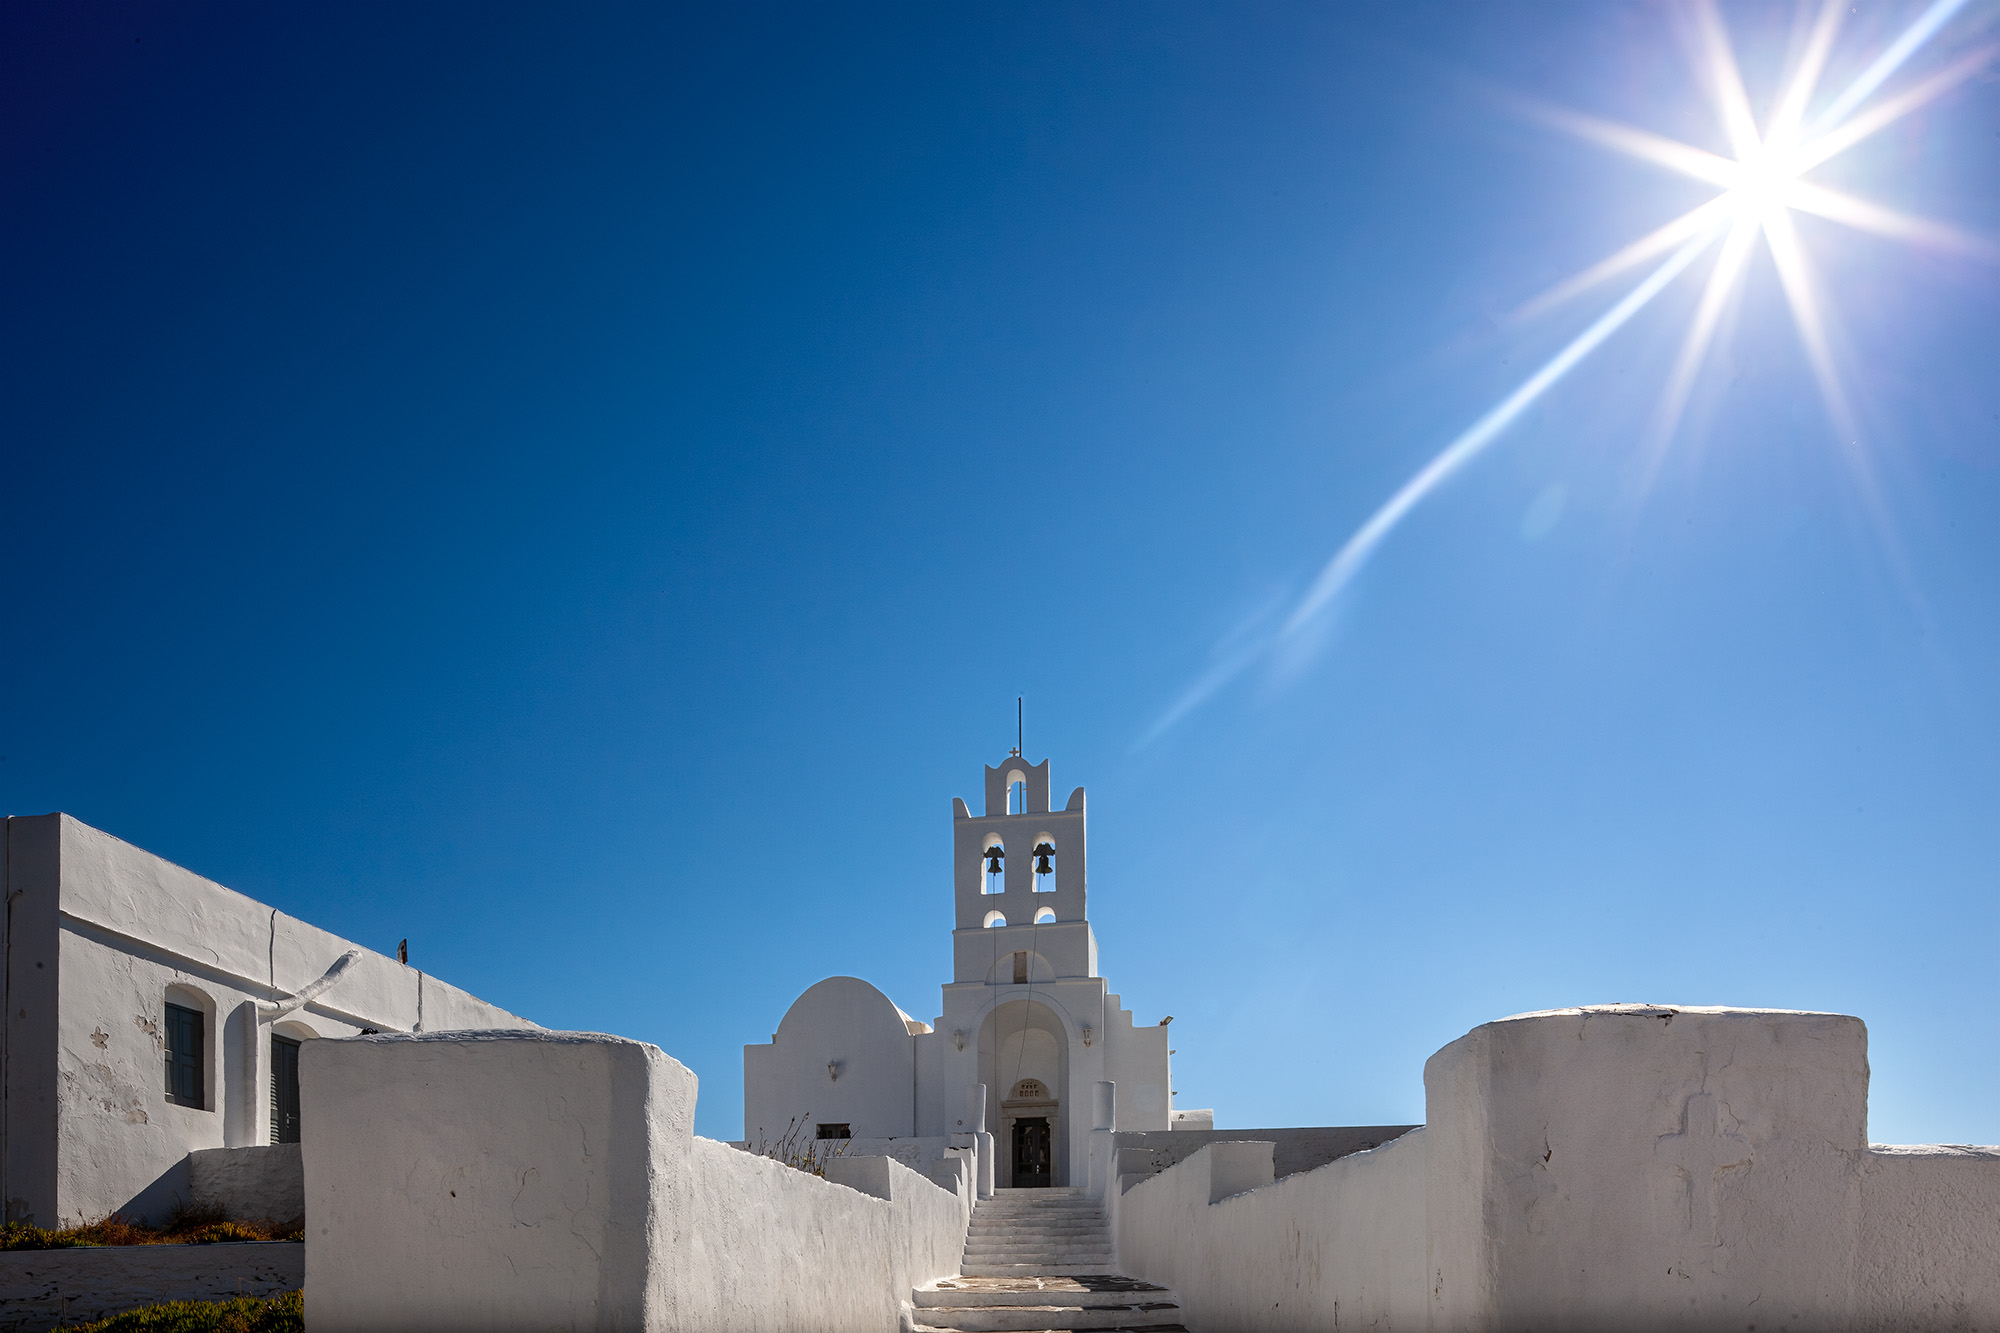 Amidst the serene ambiance of Chrysopigi Monastery on the idyllic island of Sifnos, Greece, this photograph captures a moment...